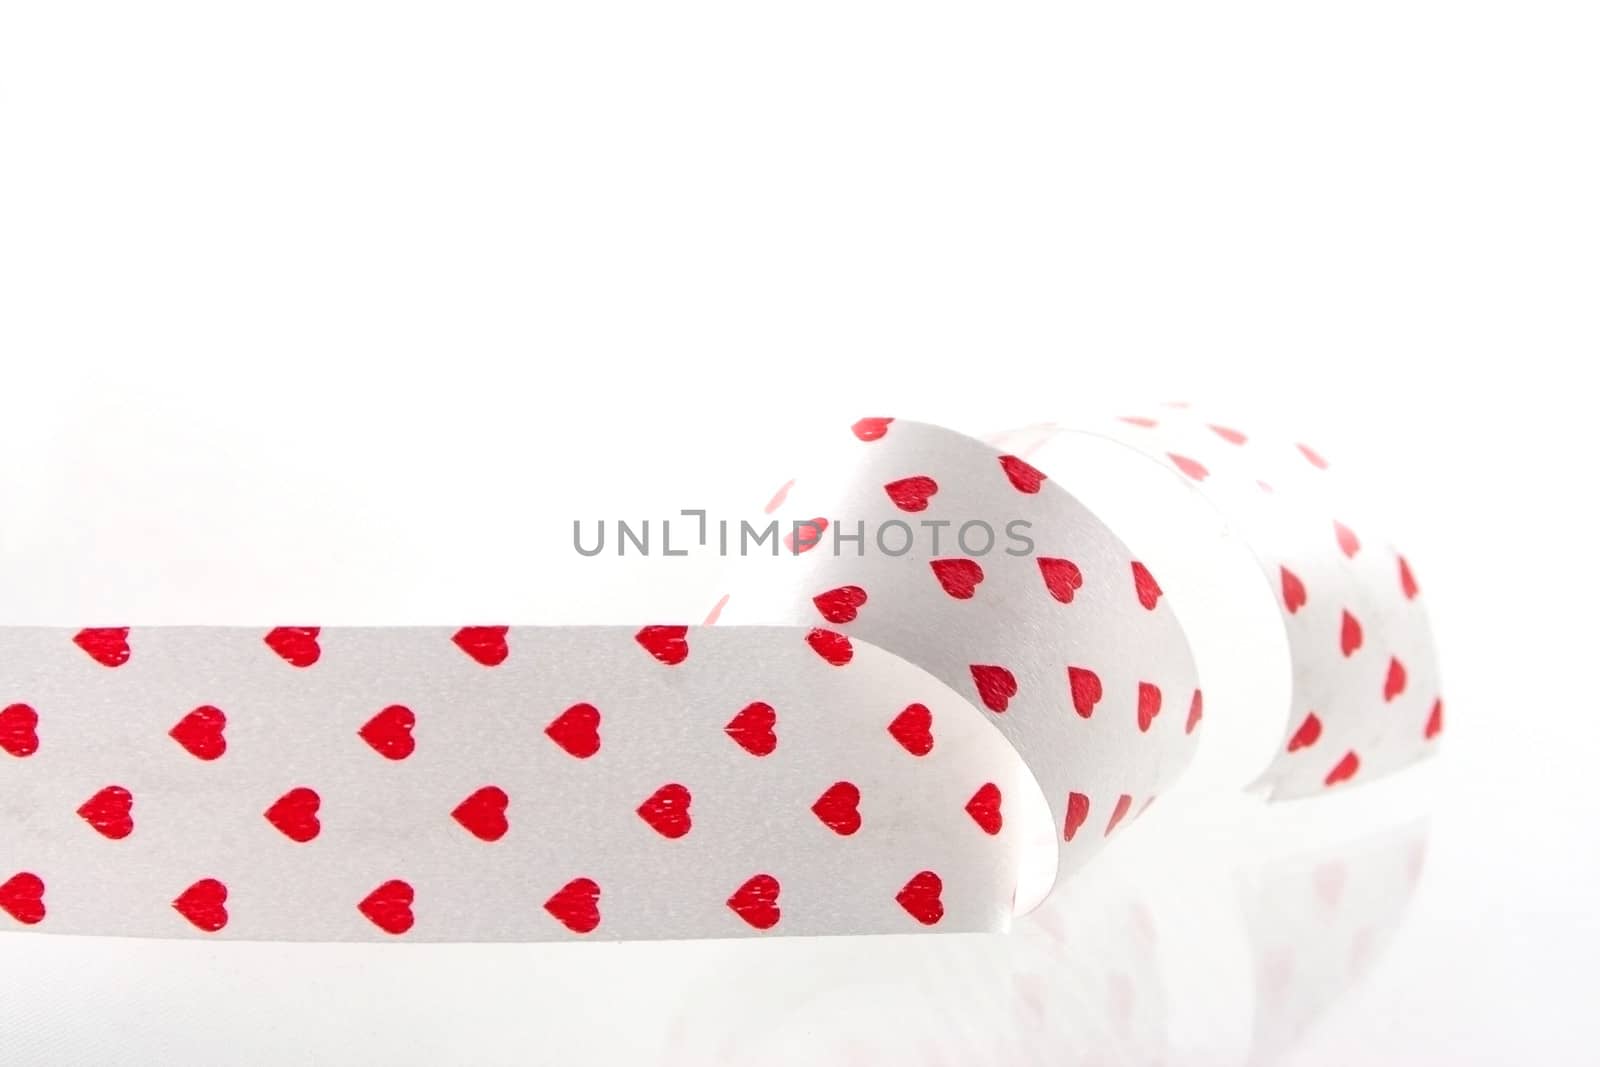 Studio shot of tape with red hearts